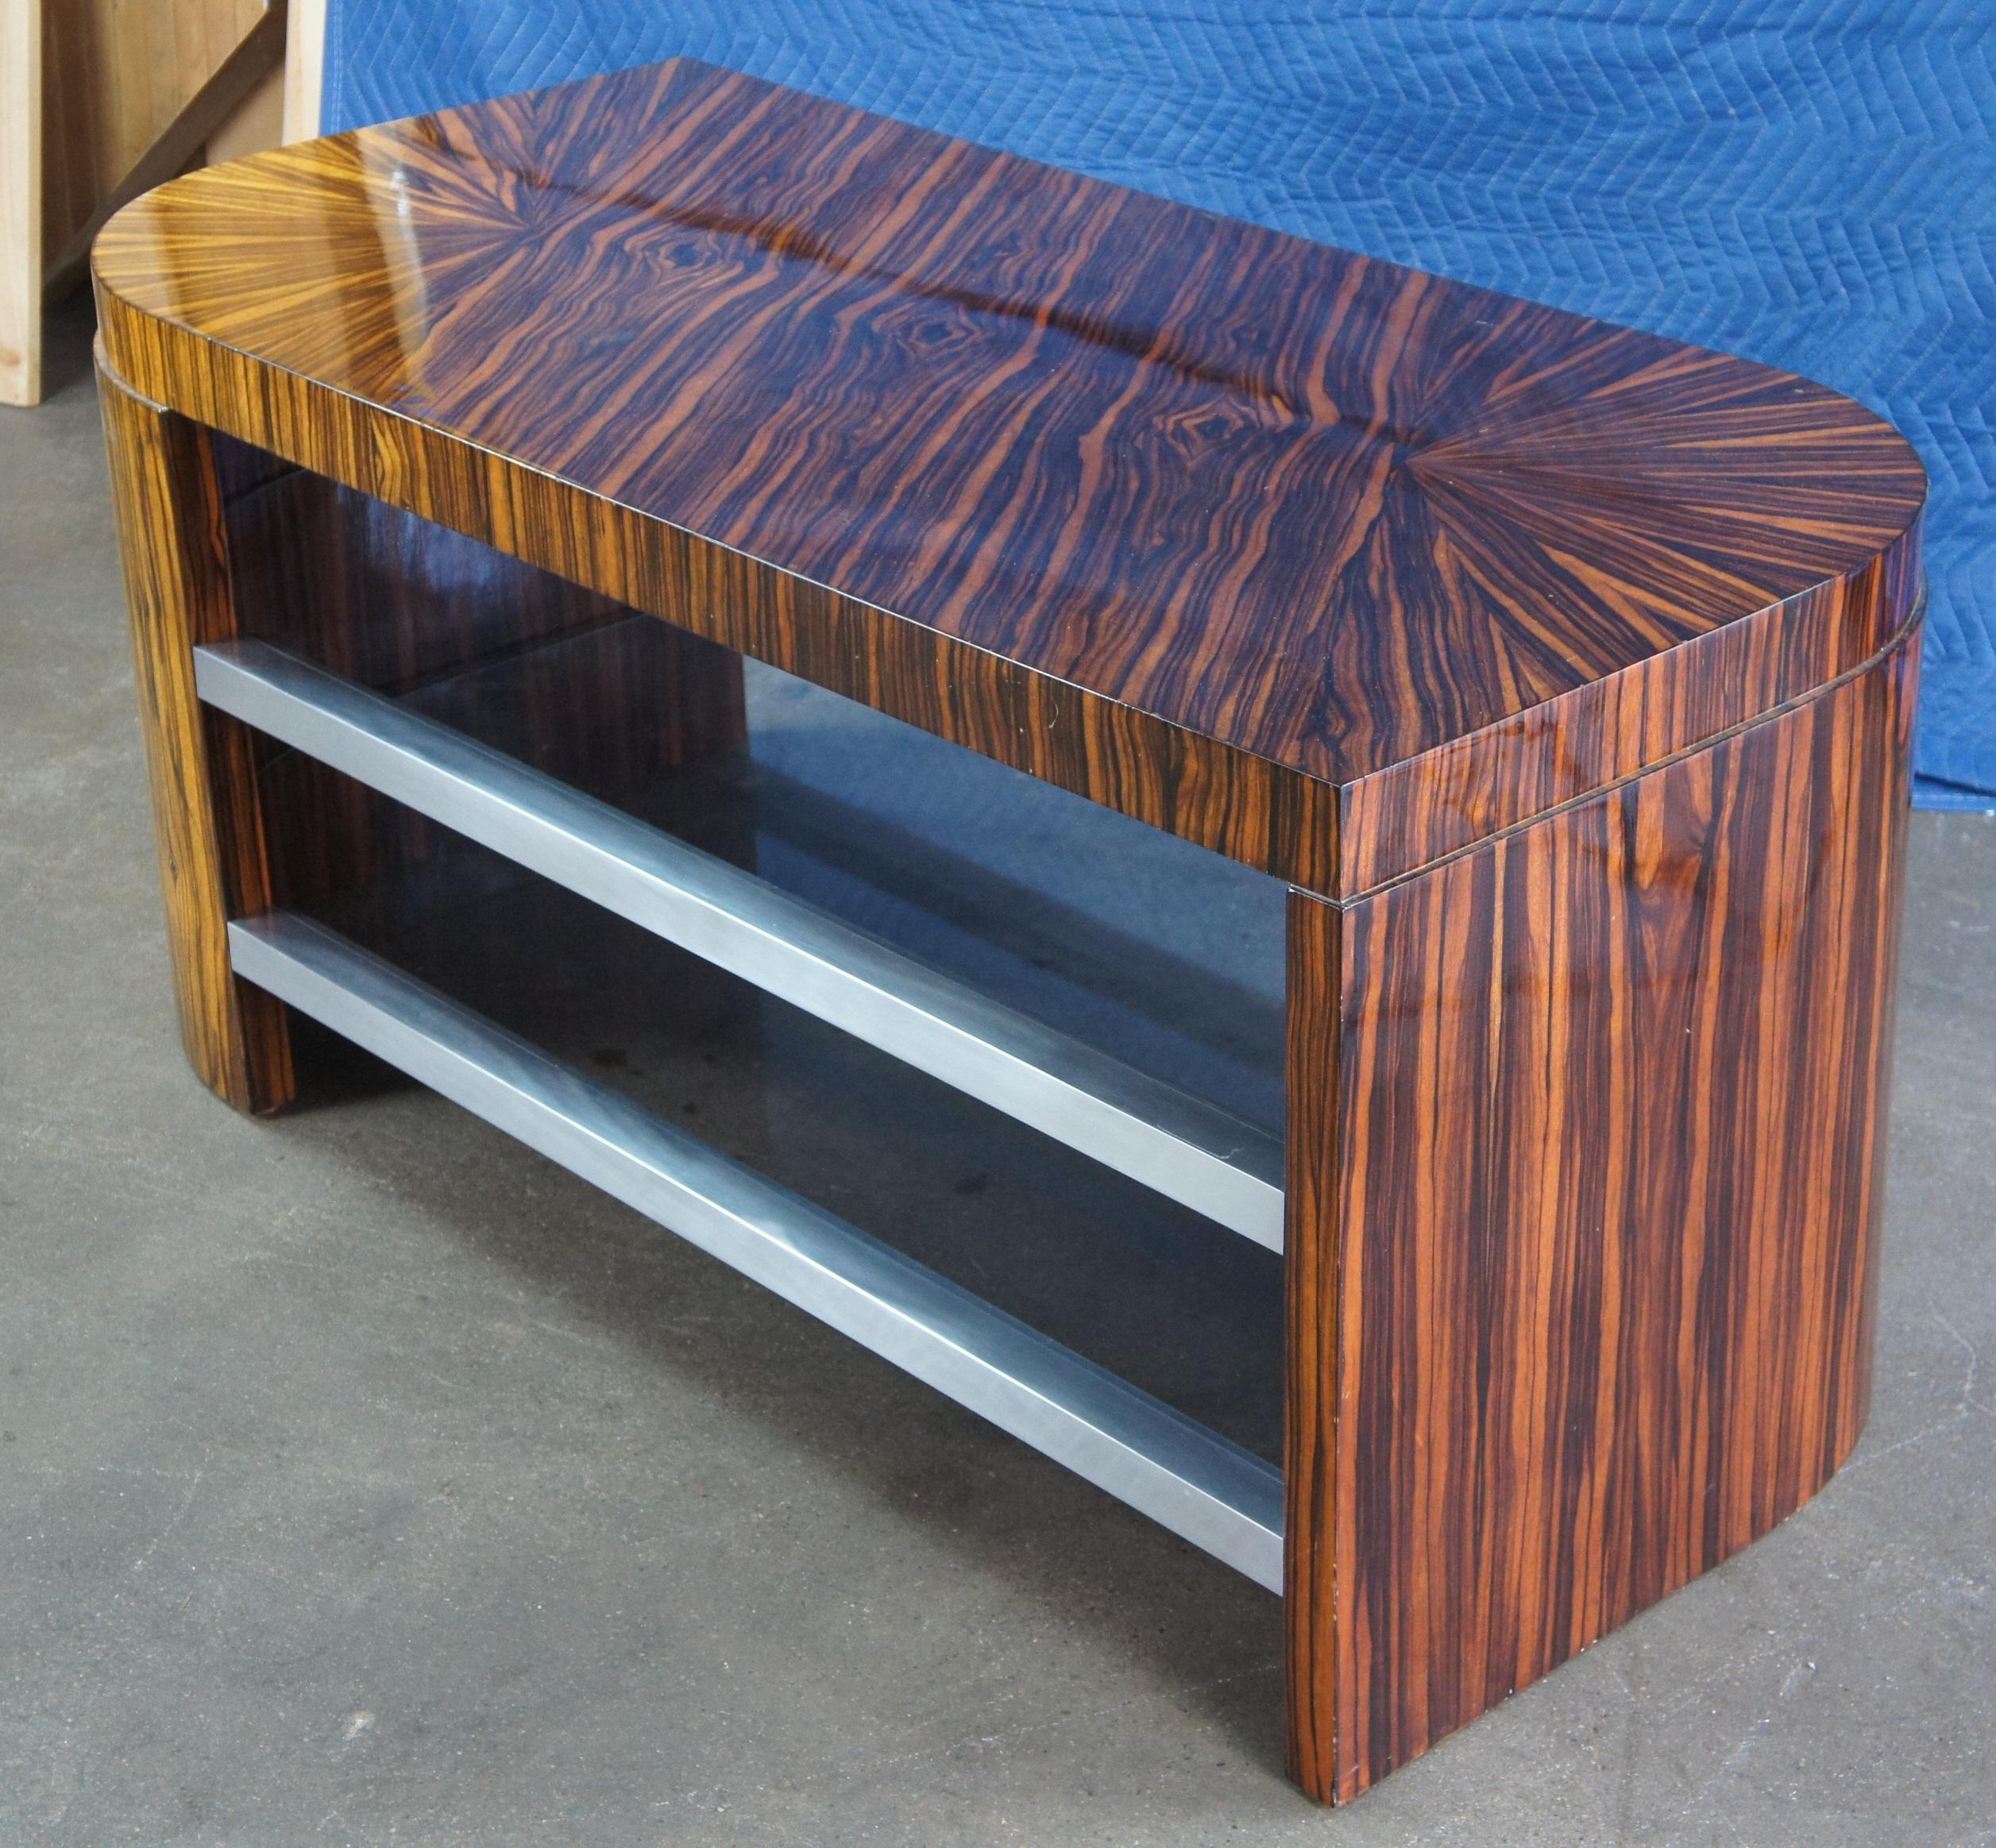 Steel 2 Mid-Century Modern Macassar Ebony Console Coffee Cocktail Tables Art Deco Pair For Sale